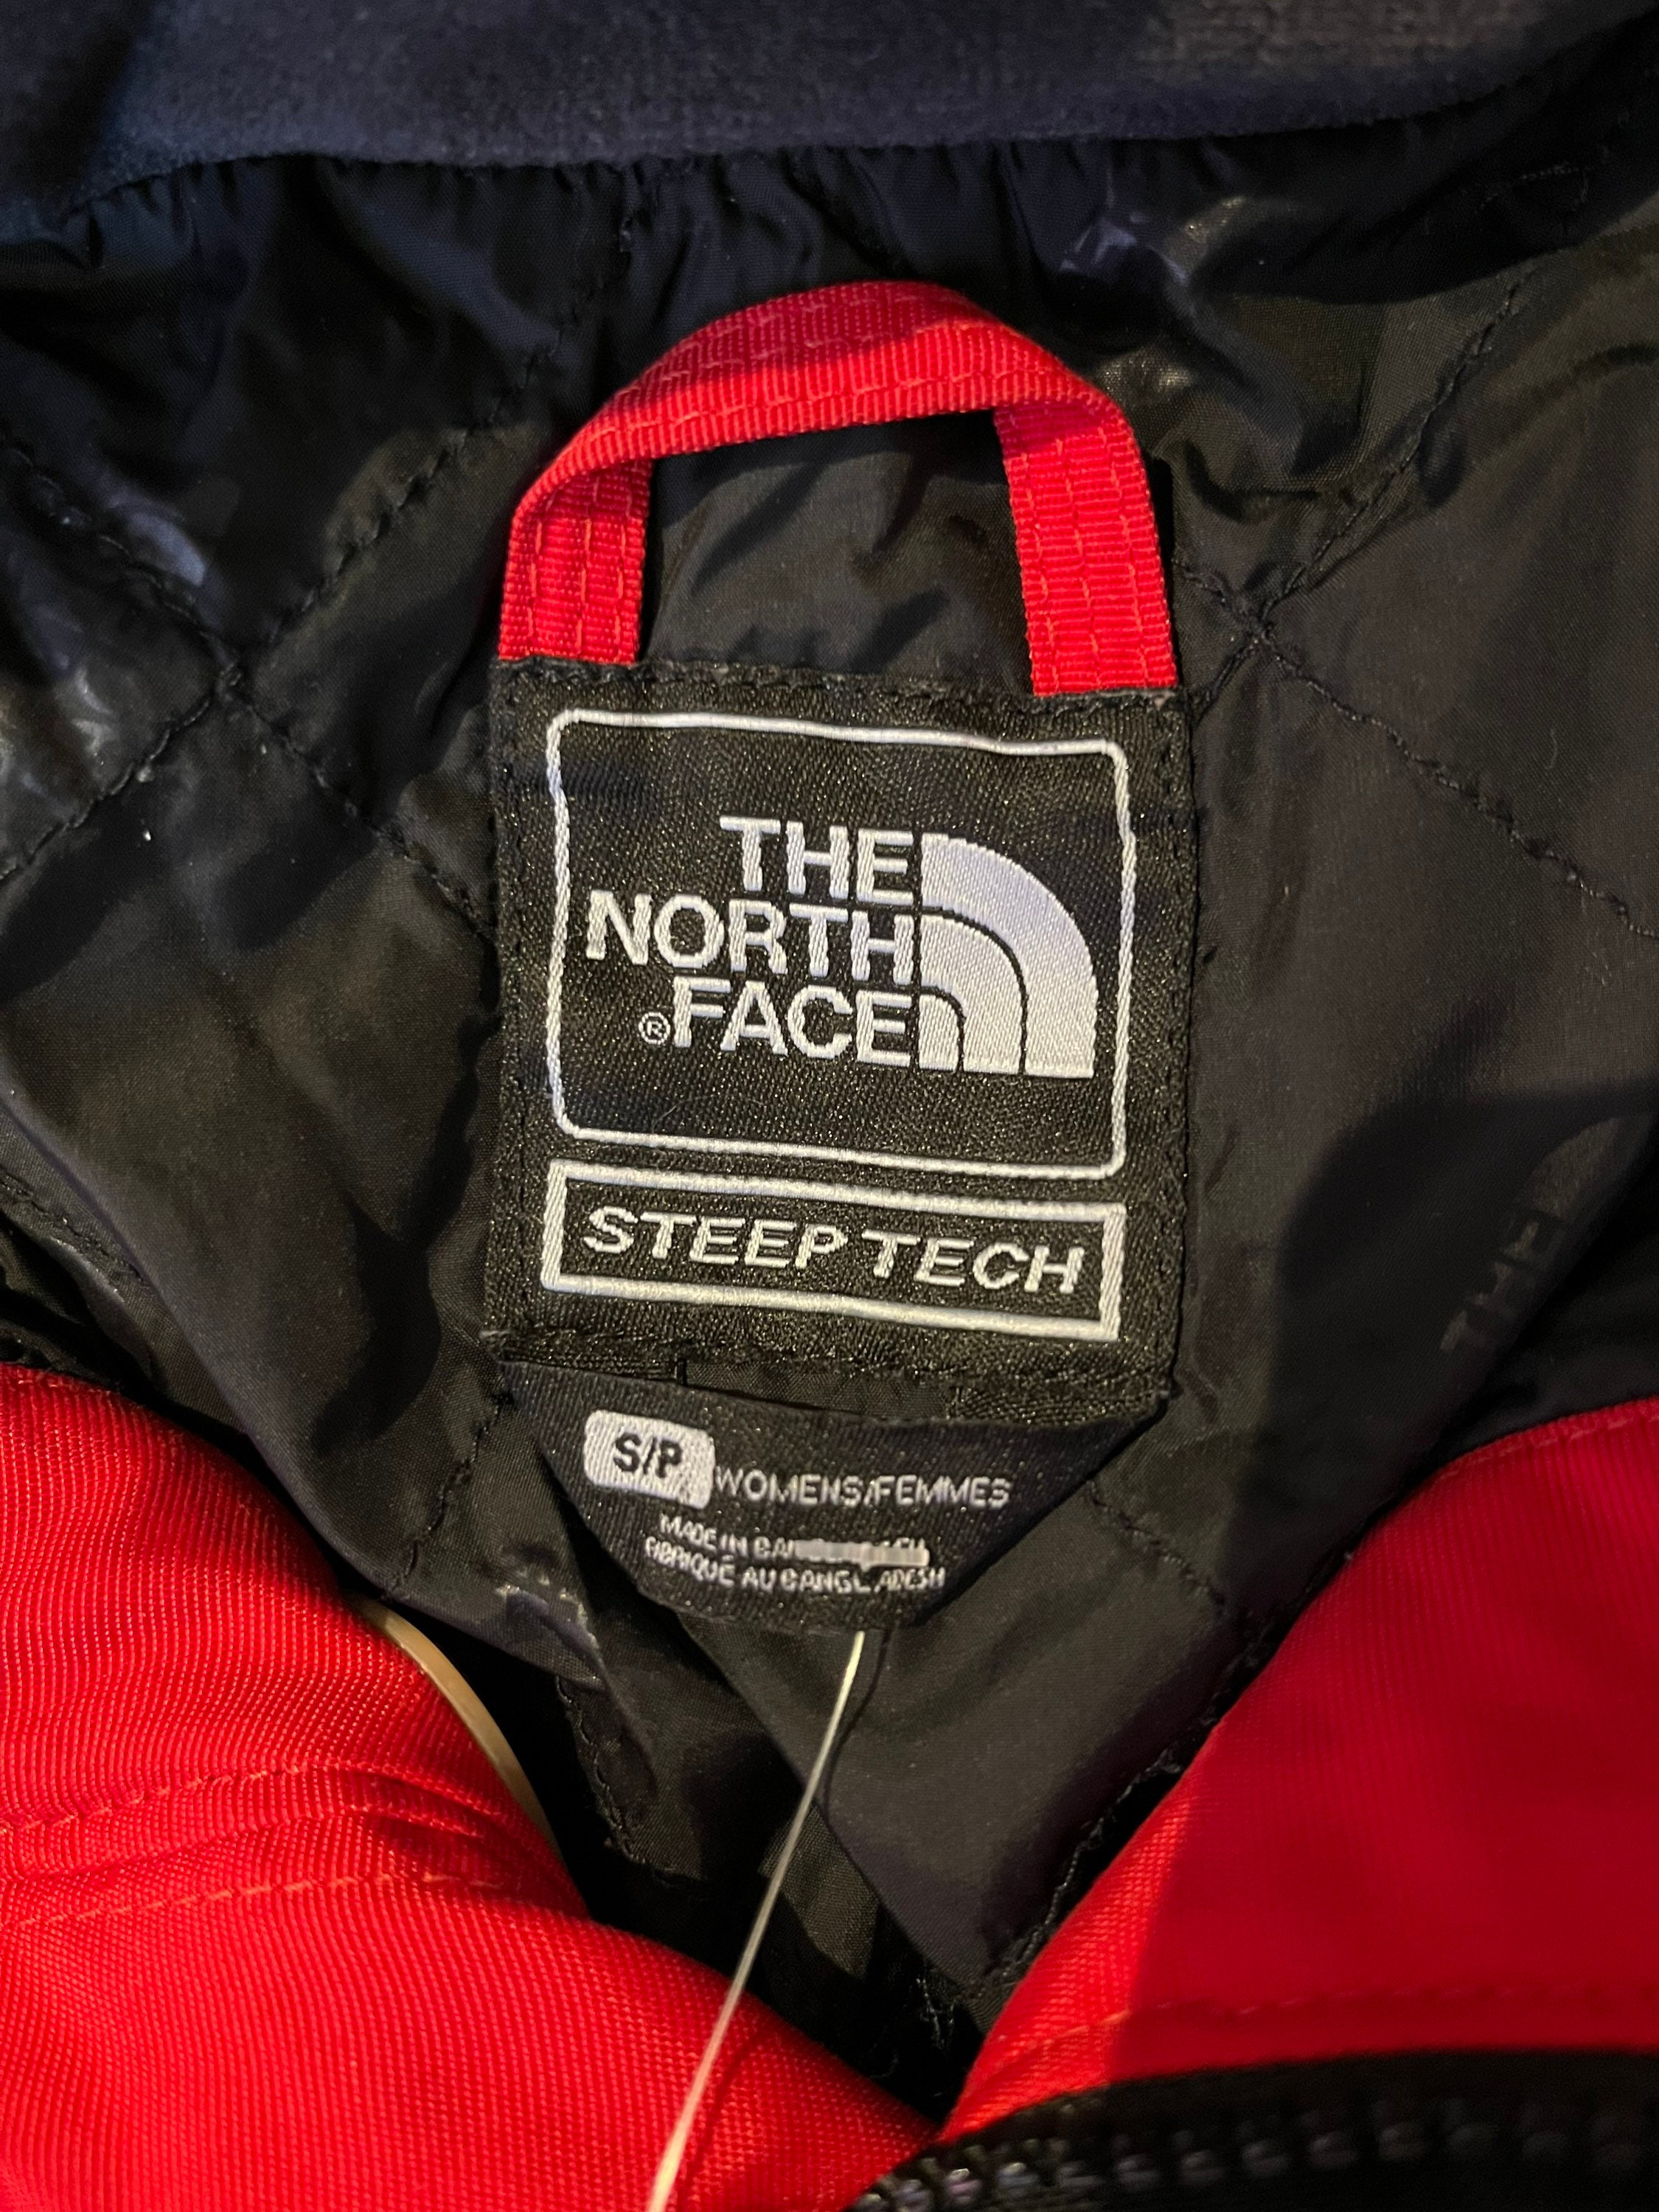 Retro 90s the North Face Steep Tech Jacket Red White Black - Etsy